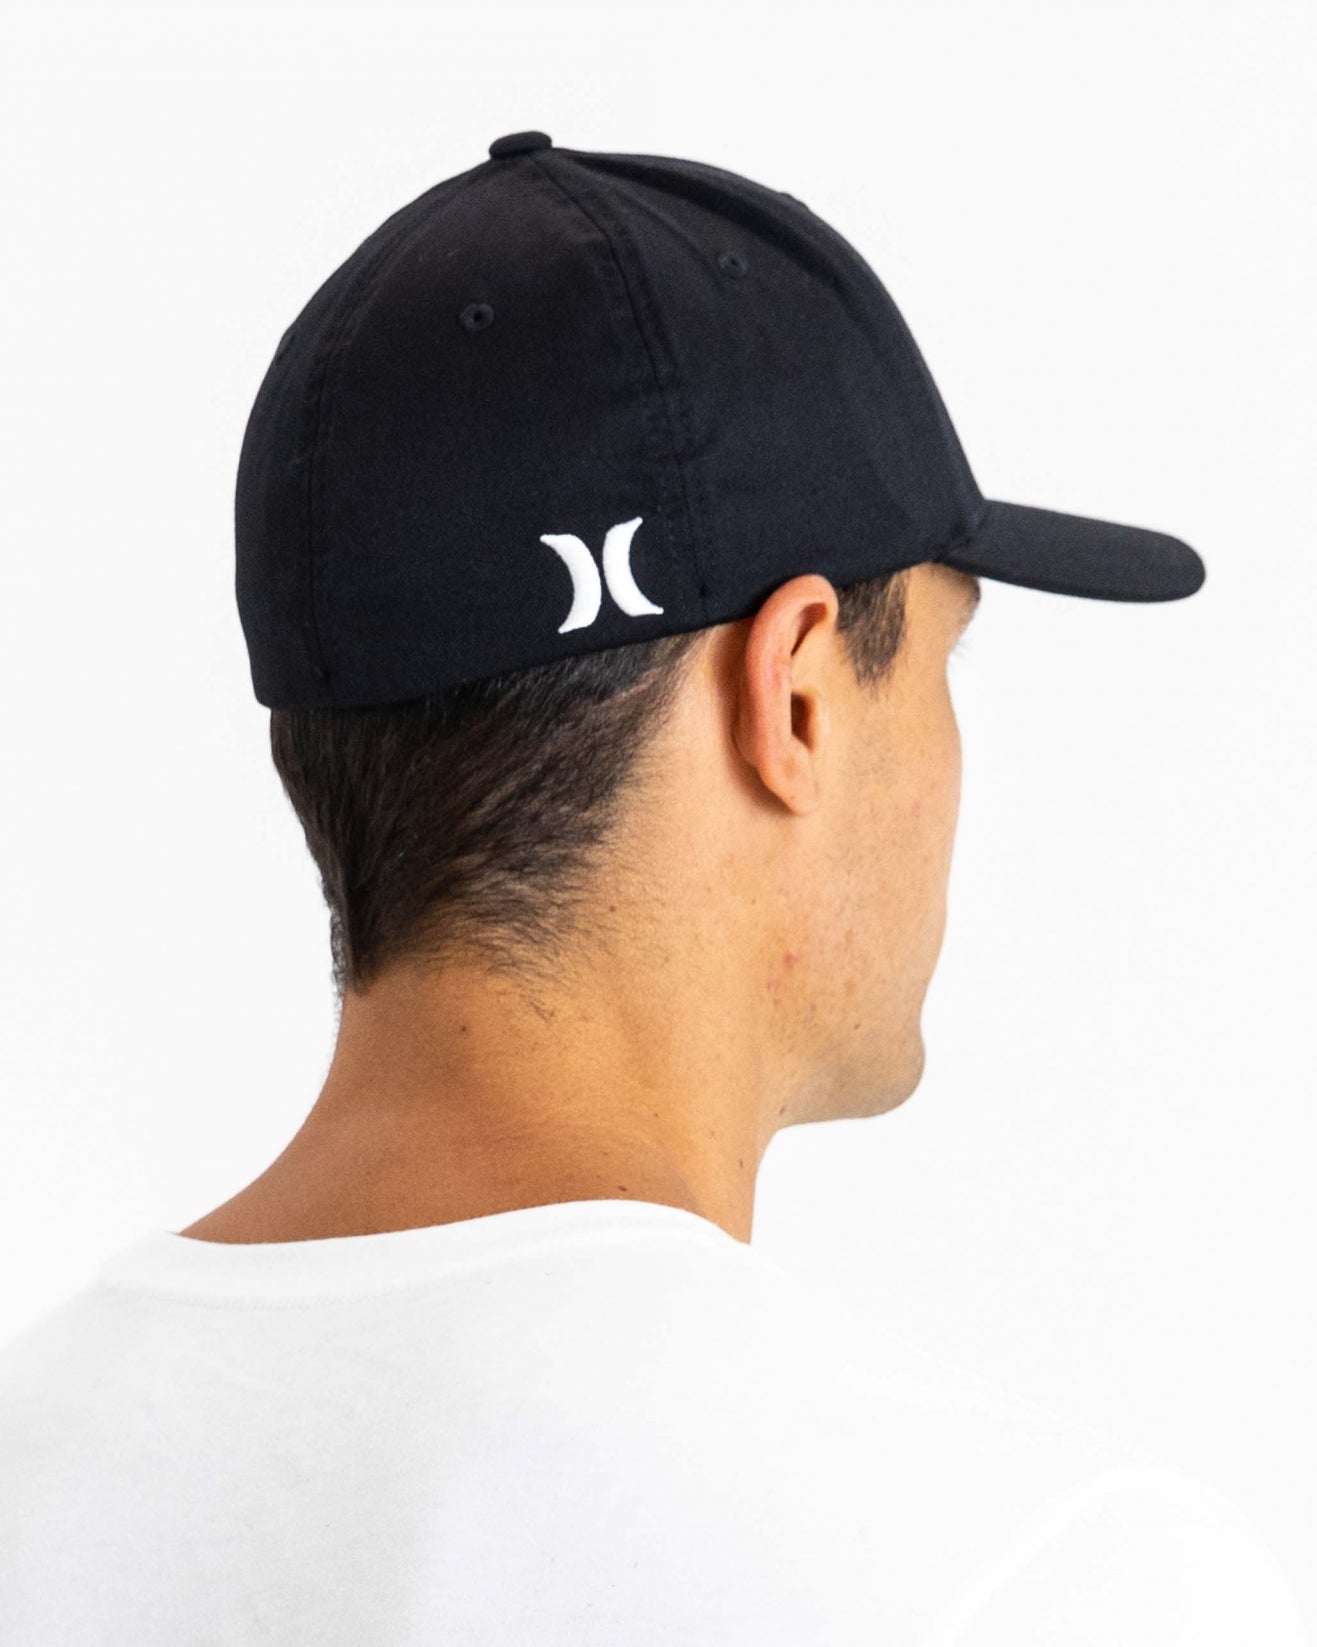 One And Only Hurley Mens Corp Hat